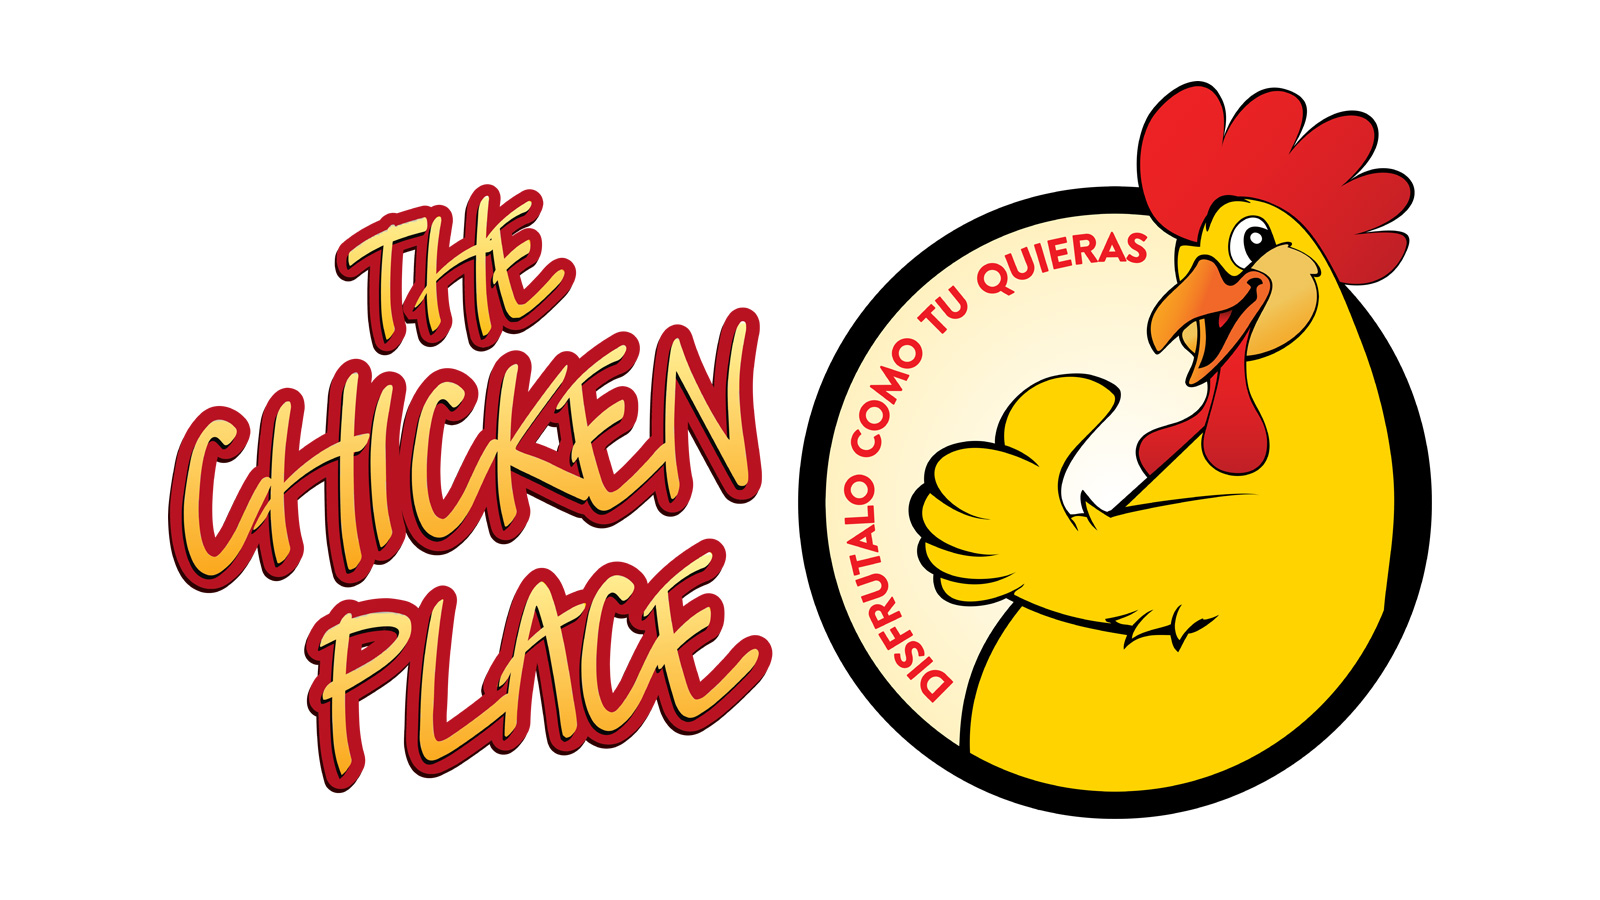 sublime-digital_chicken-place-identity-01